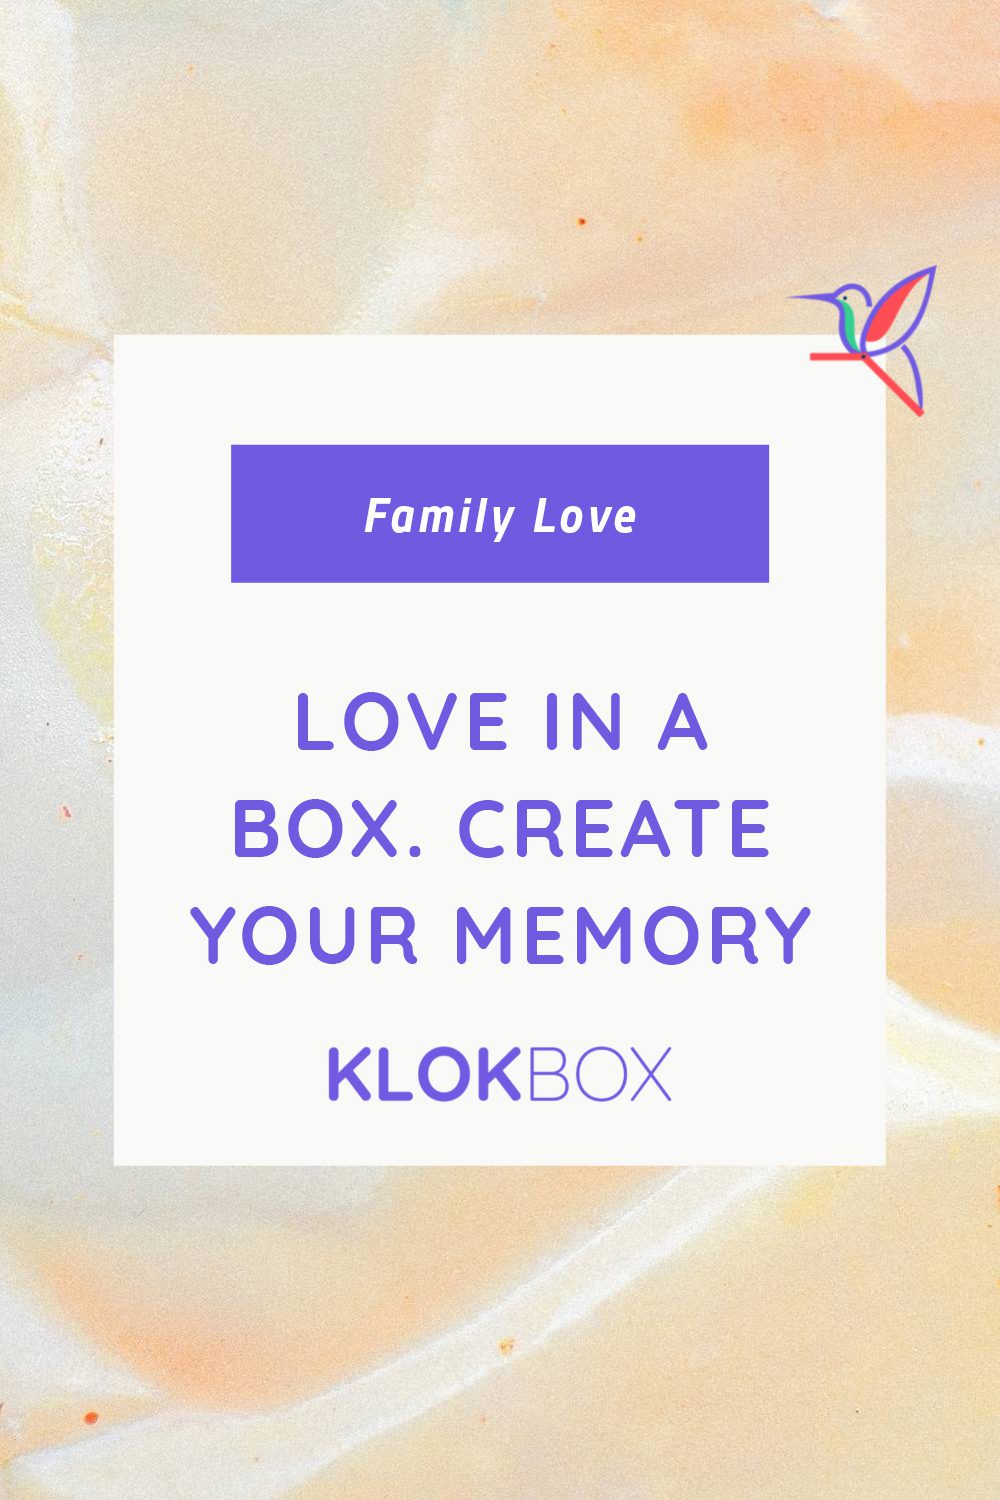 Klokbox - Your Love In A Box